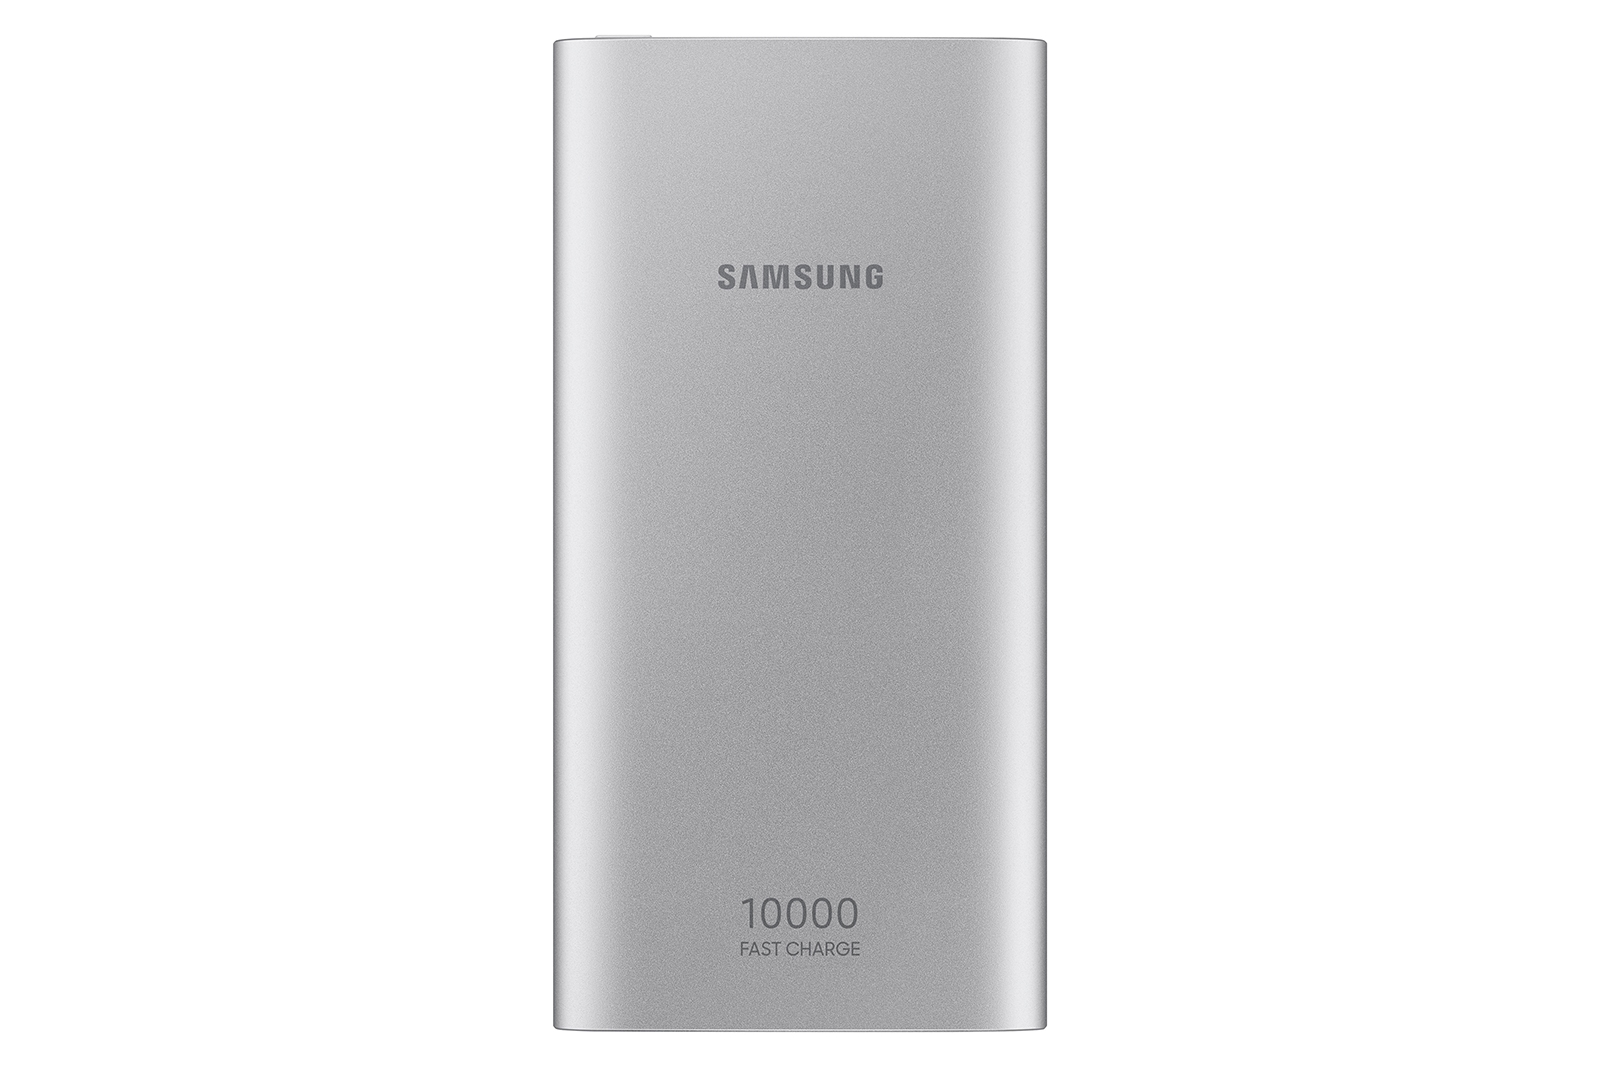 Thumbnail image of 10,000 mAh Portable Battery with Micro USB Cable, Silver